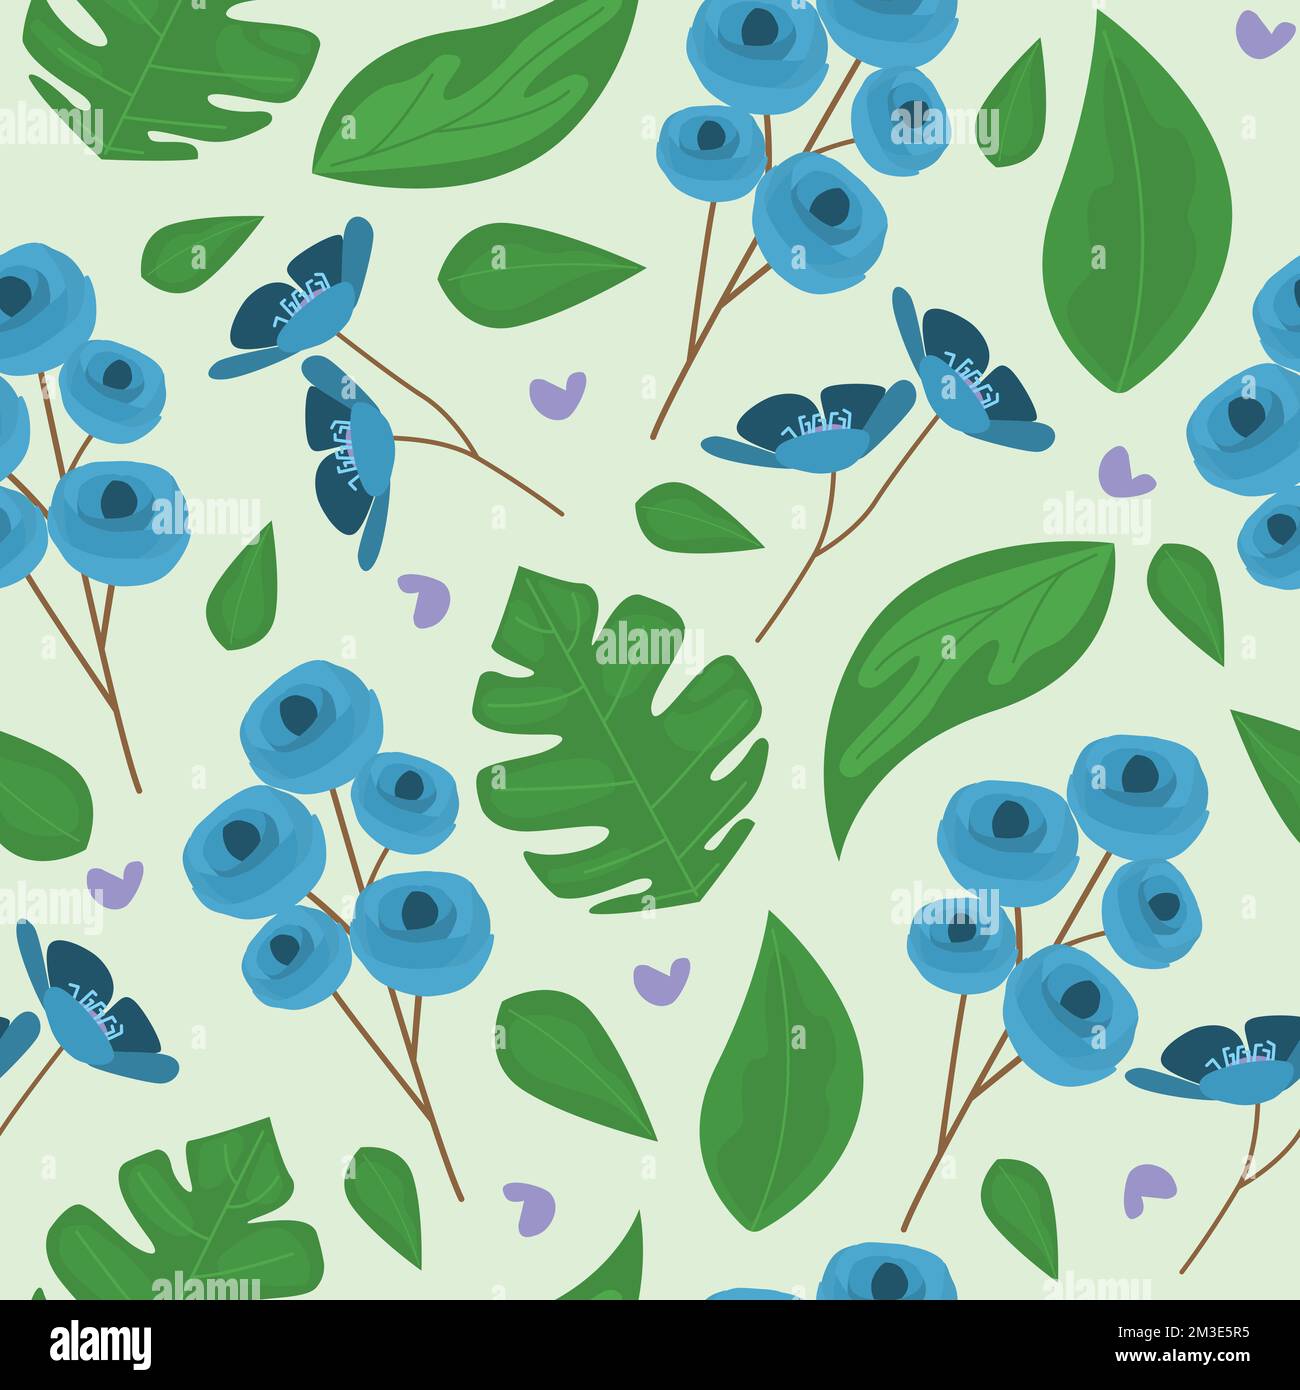 Floral Flower Nature Green Background Seamless Pattern Wallpaper Stock Vector